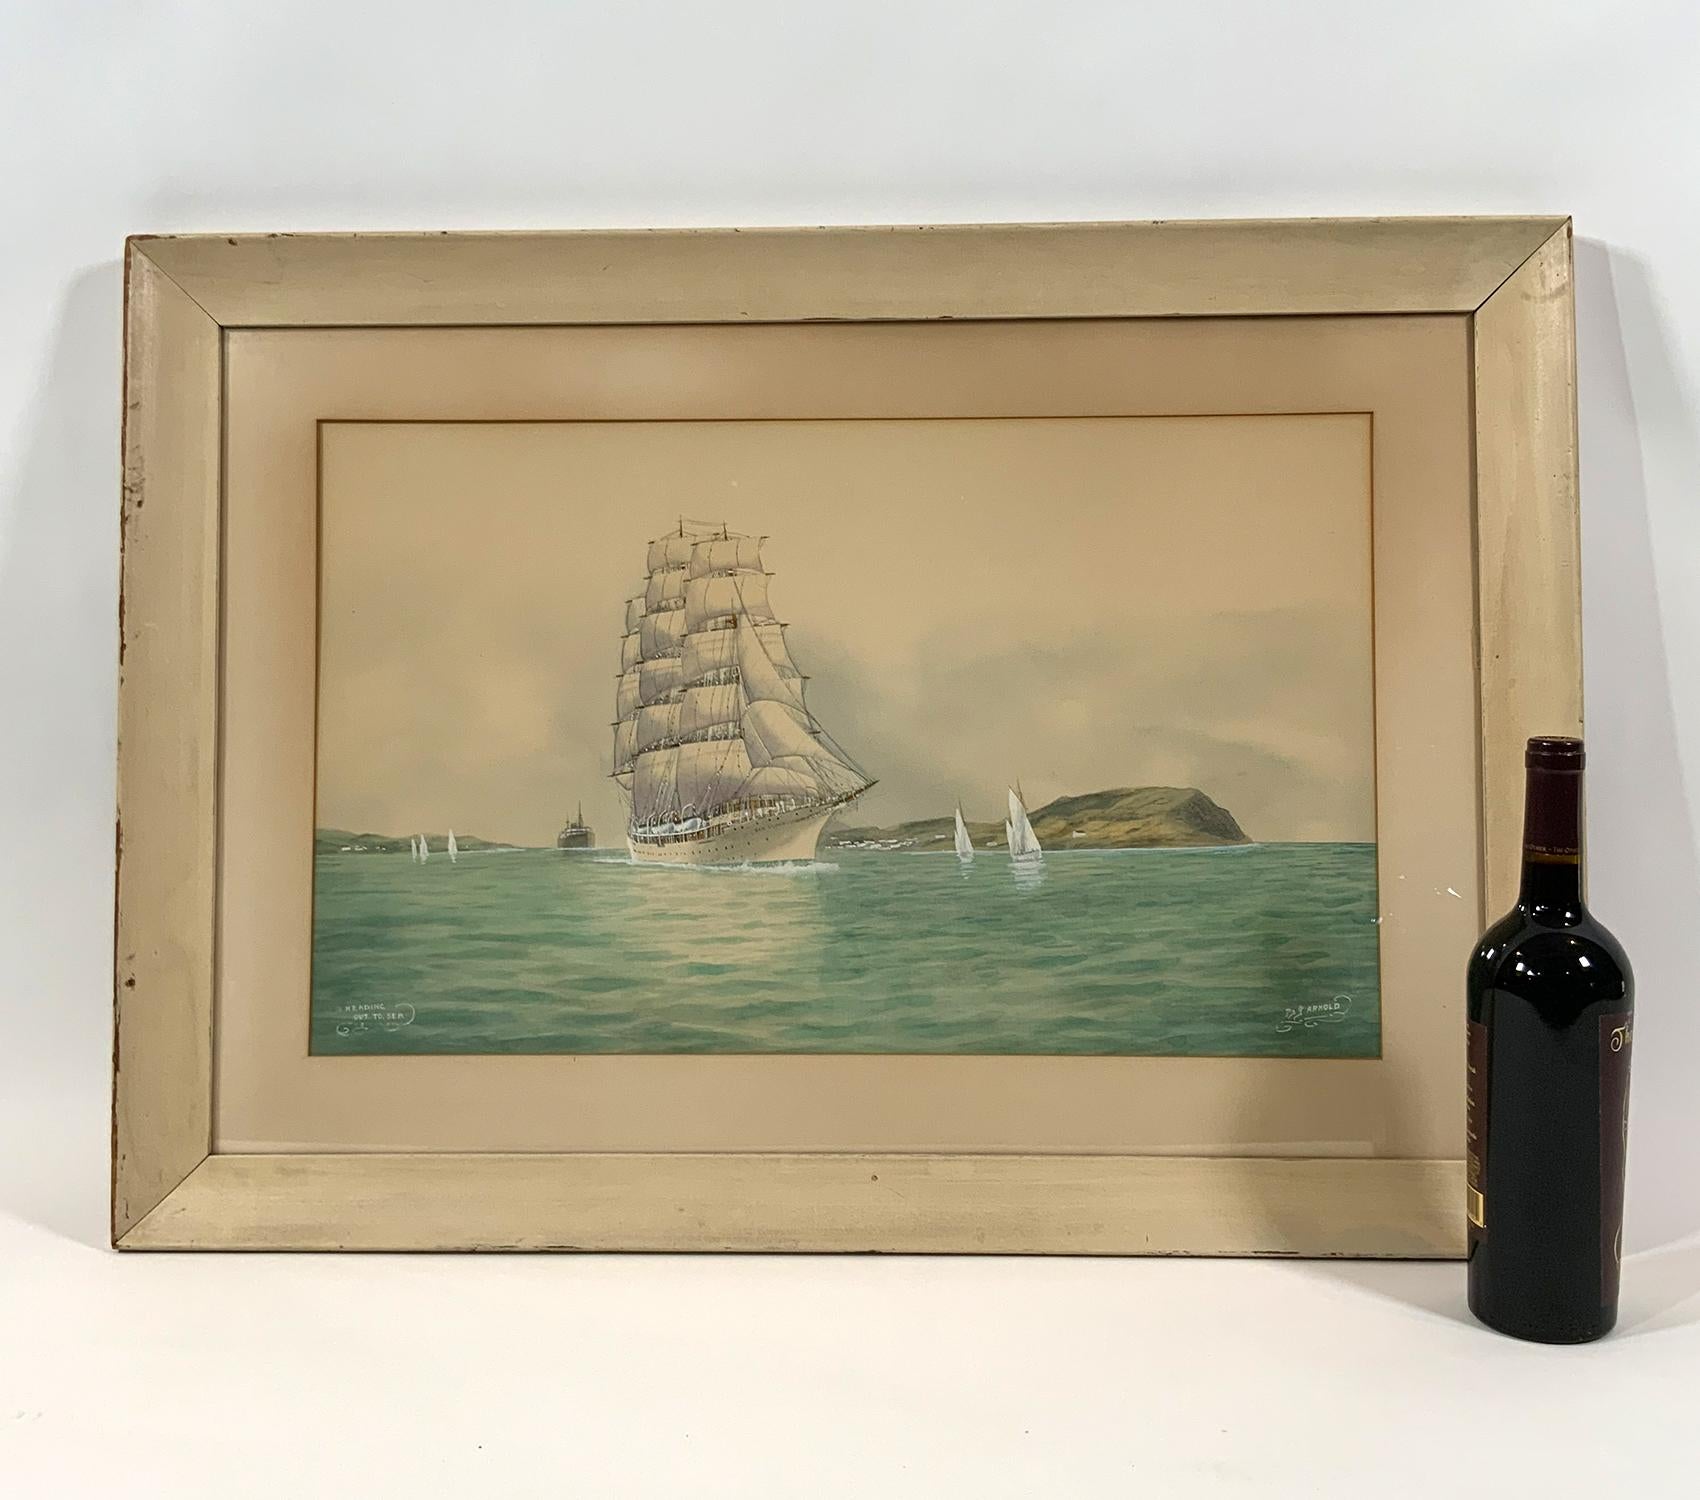 North American Painting of the Post Yacht Sea Cloud For Sale